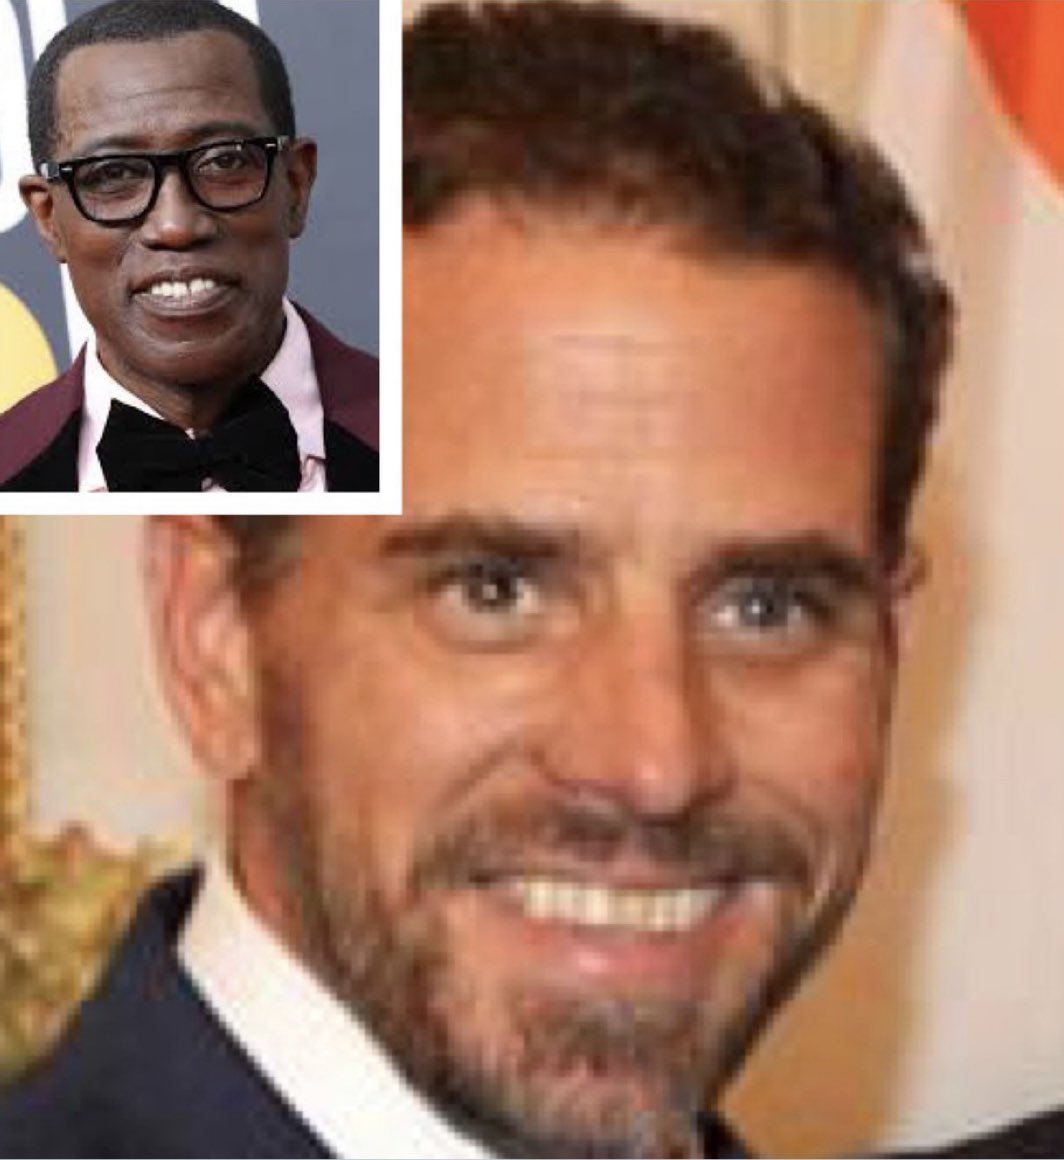 To @wesleysnipes, see how the @FBI, @IRSnews and the @TheJusticeDept will treat you if you are a liberal white democrat vs a Black man for the same charges?  They gave corrupt crack head Hunter probation and you prison for the same damn thing. They are also treating…